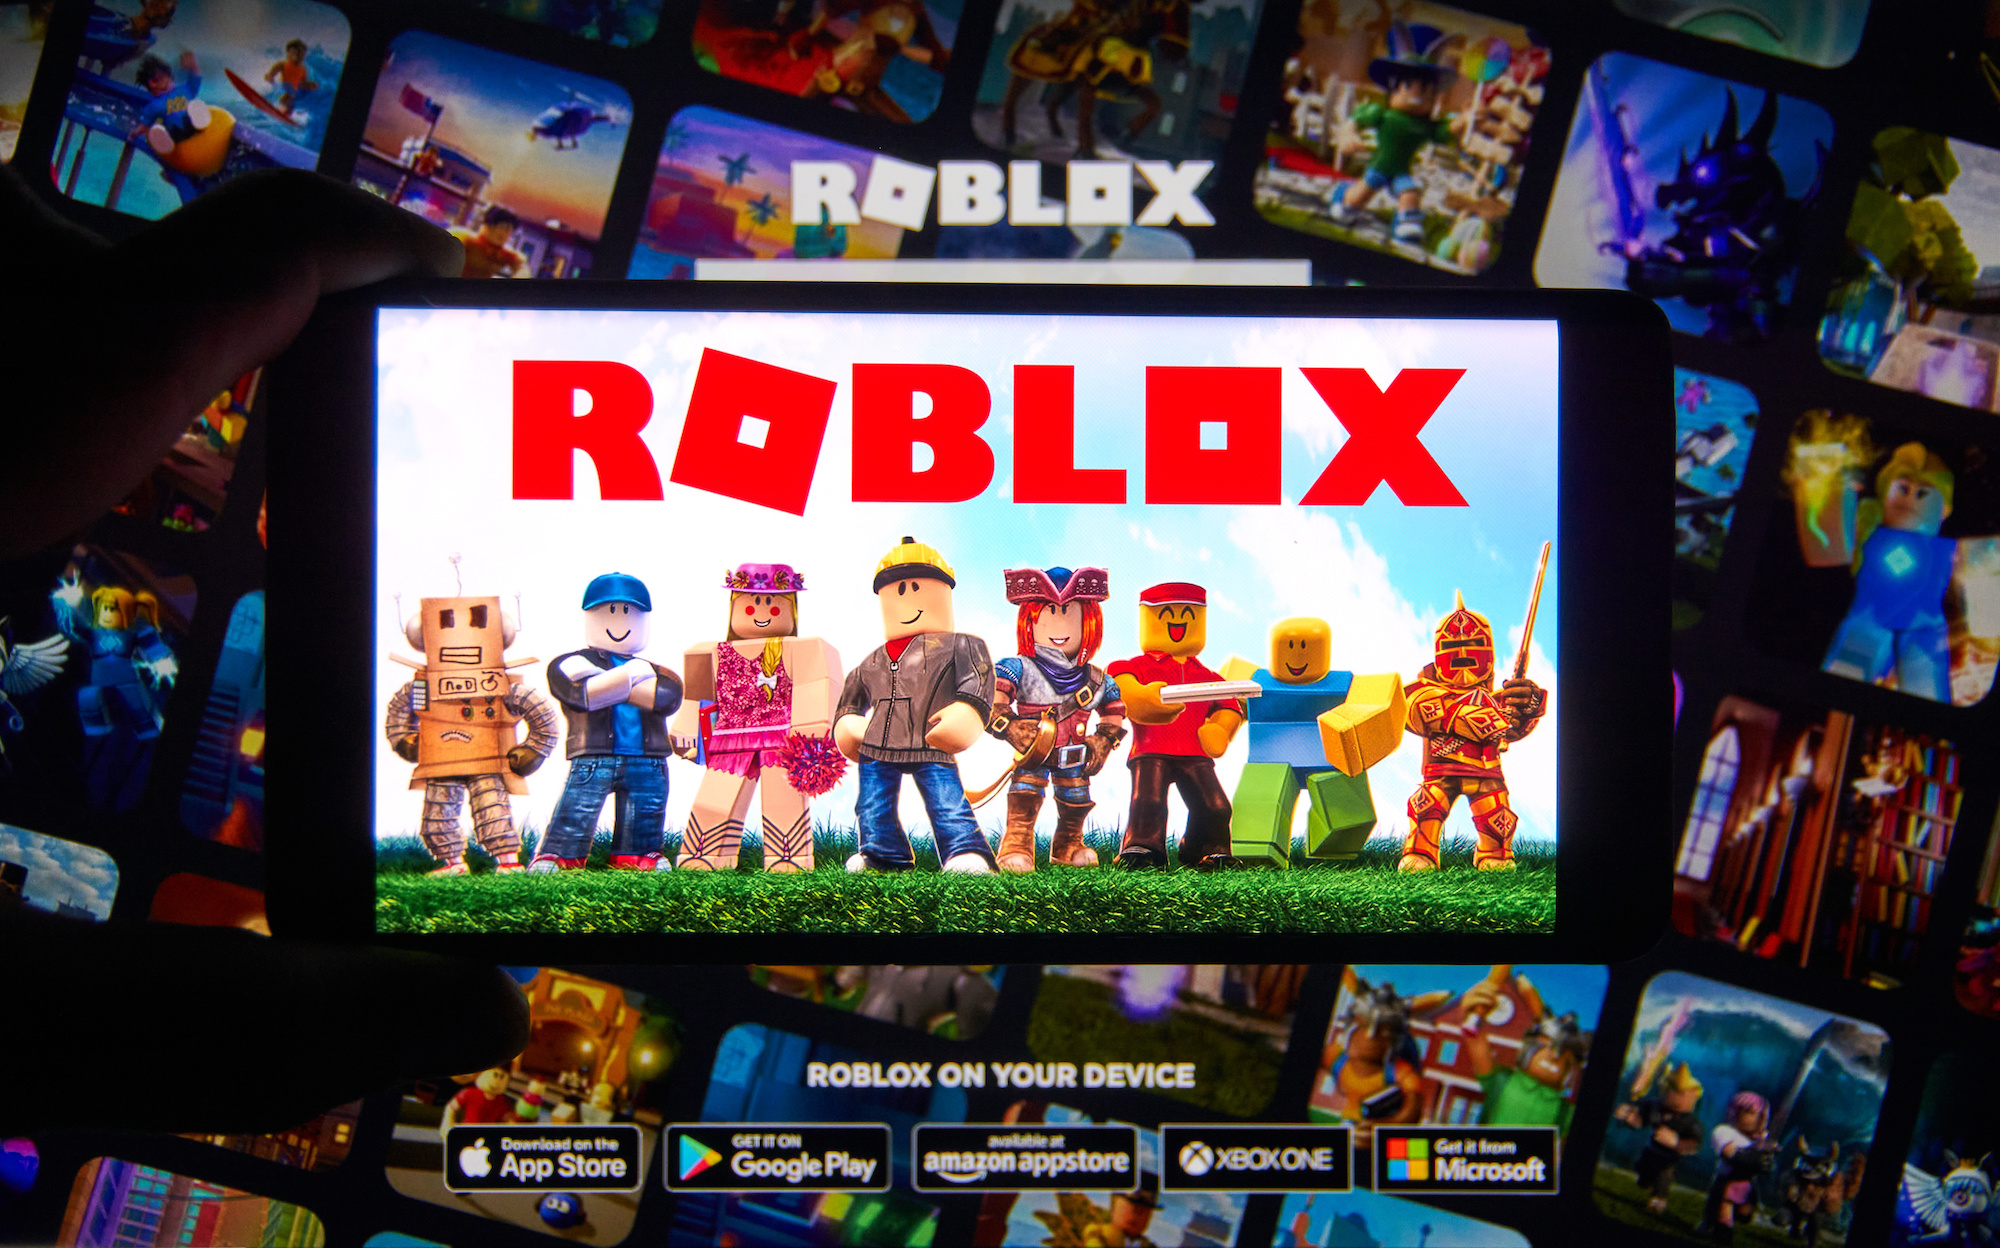 How to Change Your Background on Roblox